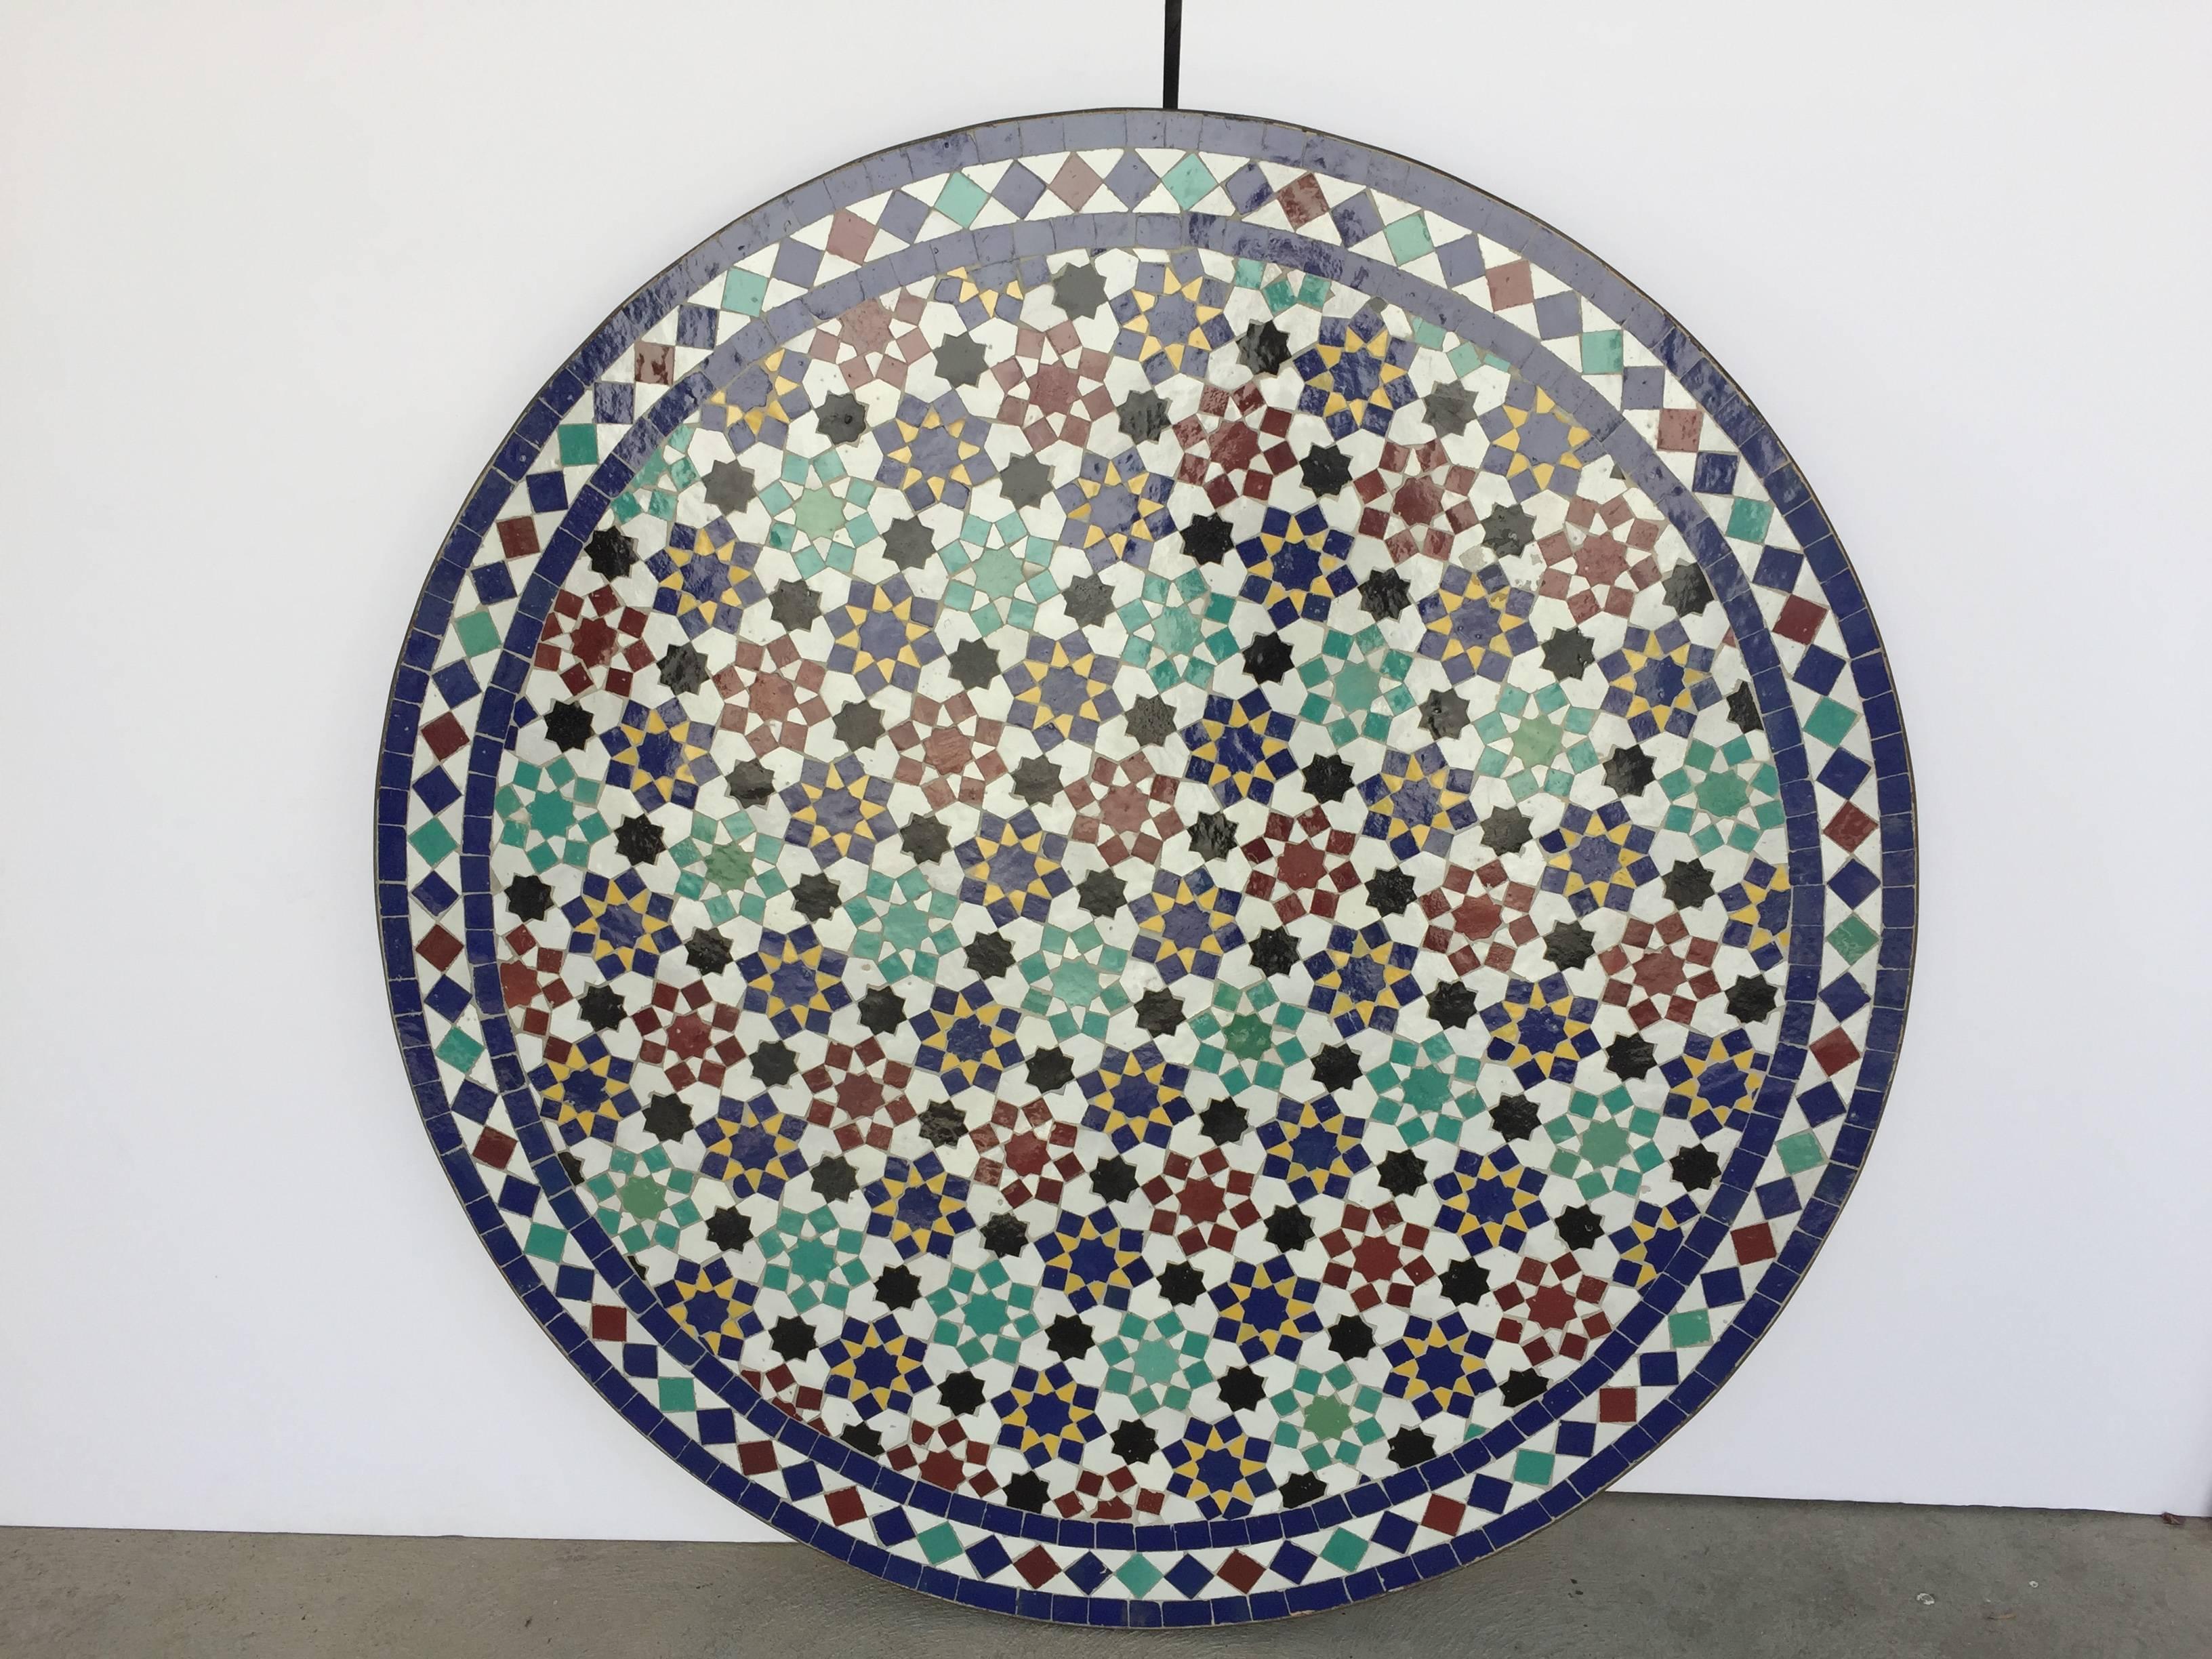 Moroccan round mosaic tile table delicately handcrafted by expert artisans in Fez, Morocco, using reclaimed old glazed tiles inlaid in concrete with traditional Islamic Moorish geometrical design in white, blue, red, green colors.
Moroccan mosaic